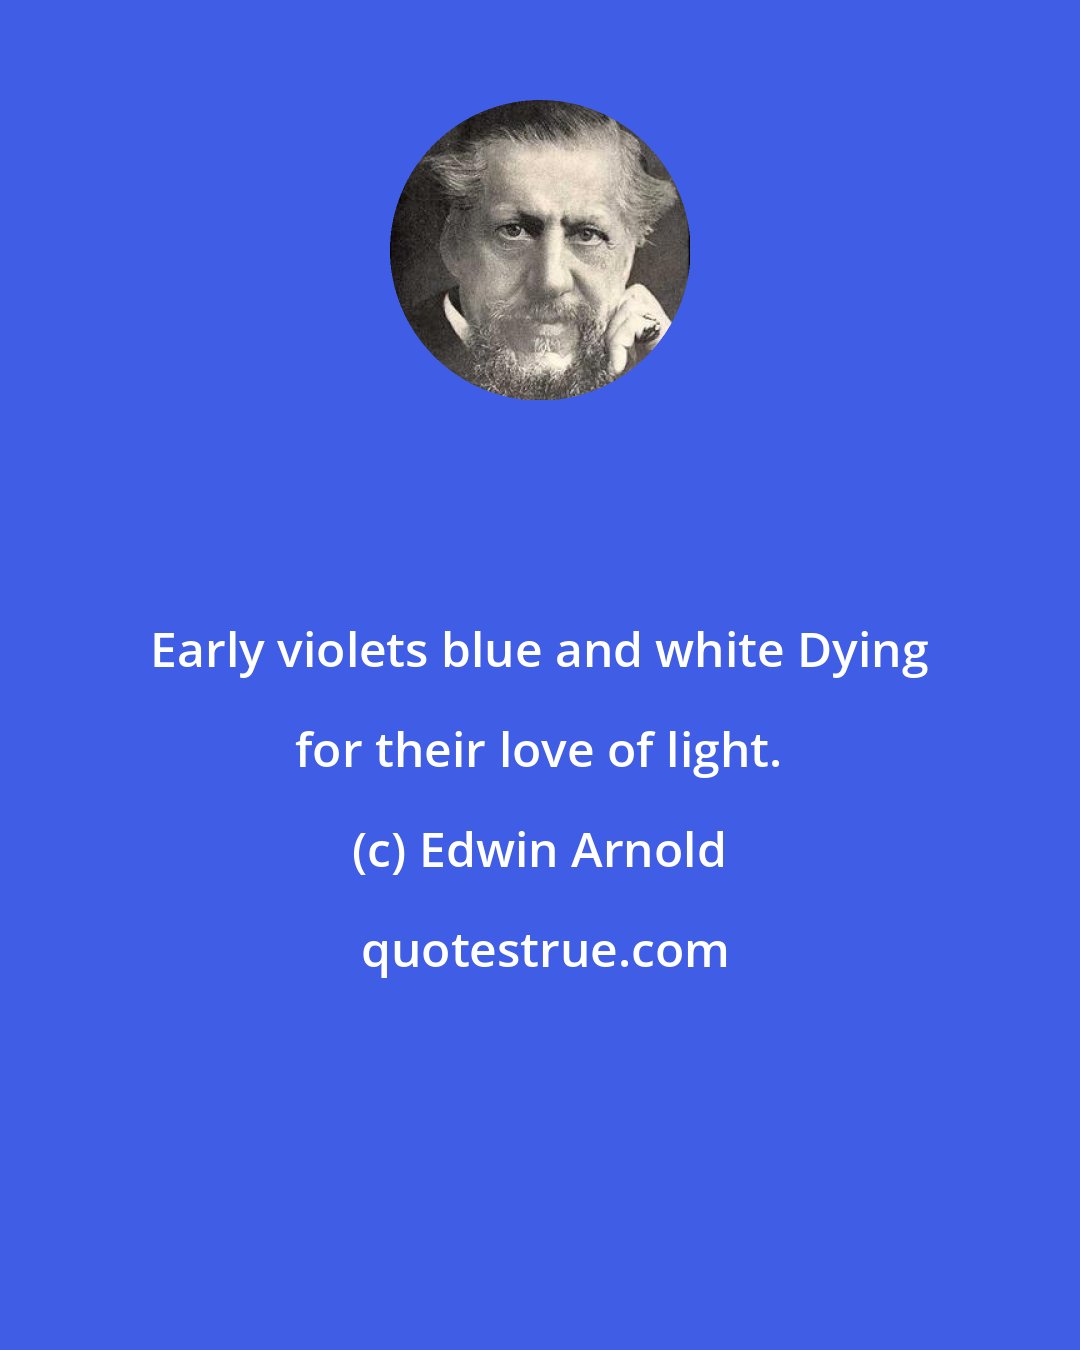 Edwin Arnold: Early violets blue and white Dying for their love of light.